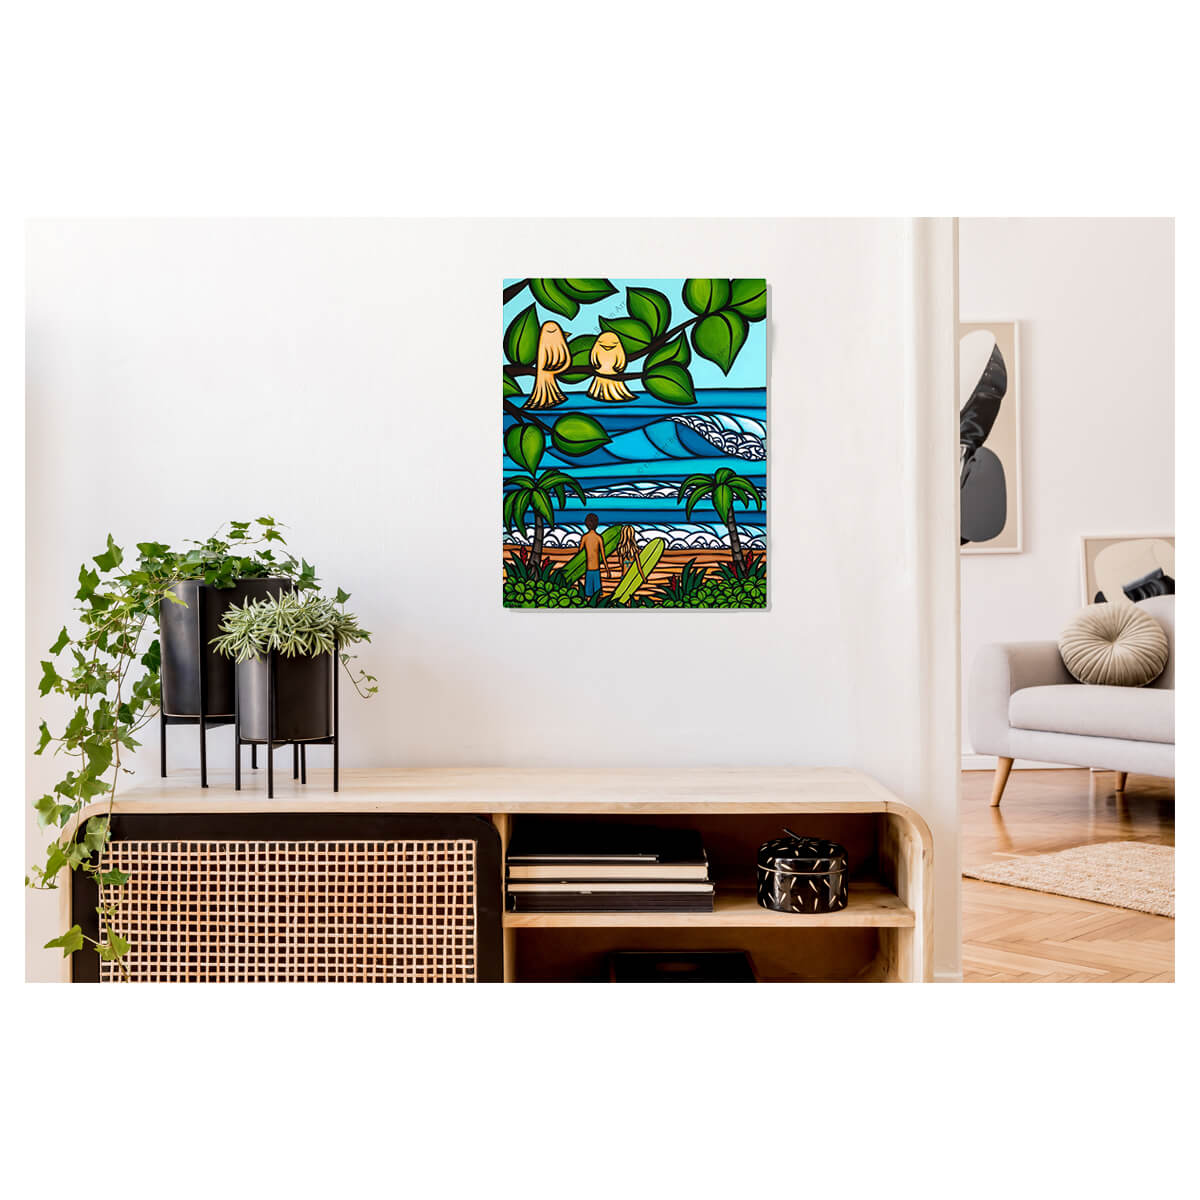 A metal art print featuring Hawaiian birds rest happily, while surfers admire the waves by Hawaii surf artist Heather Brown